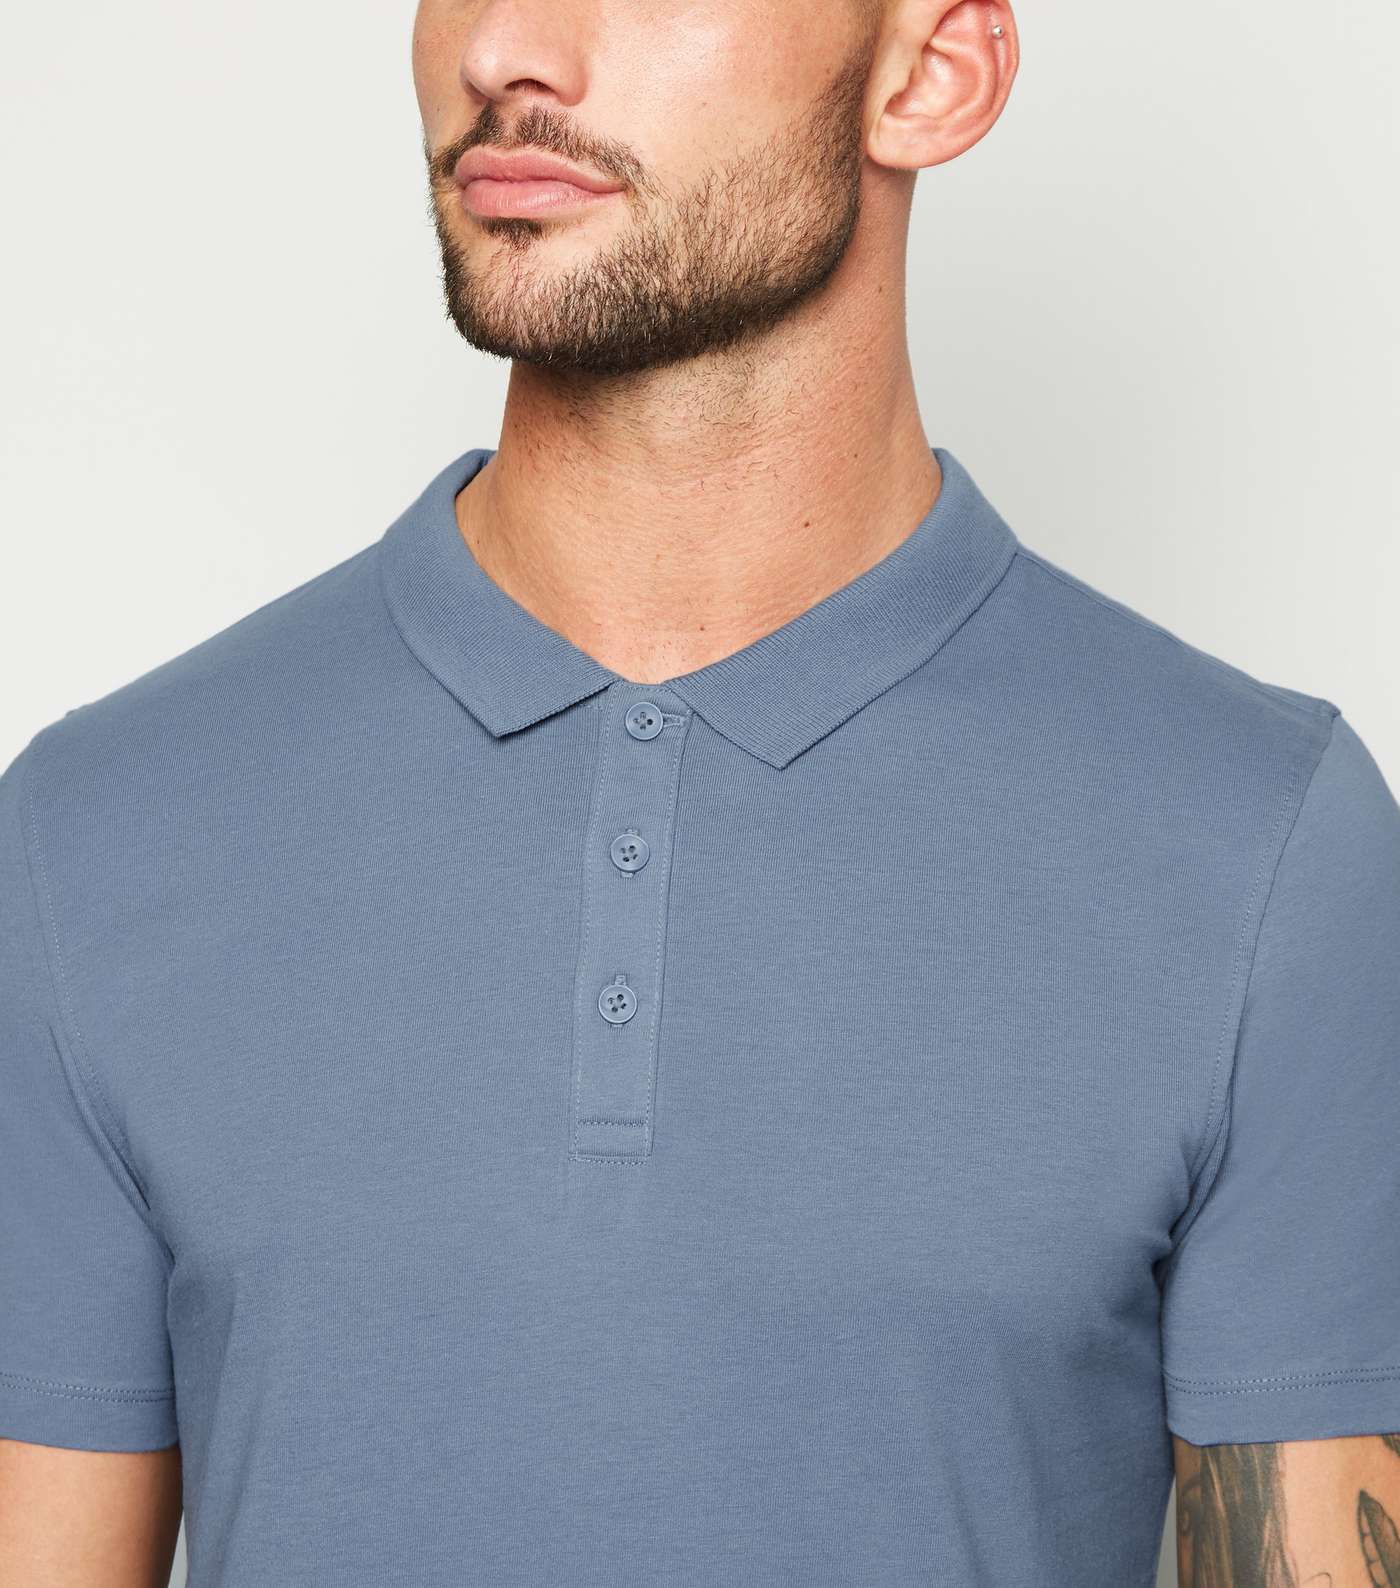 Blue Muscle Fit Polo Shirt Image 5